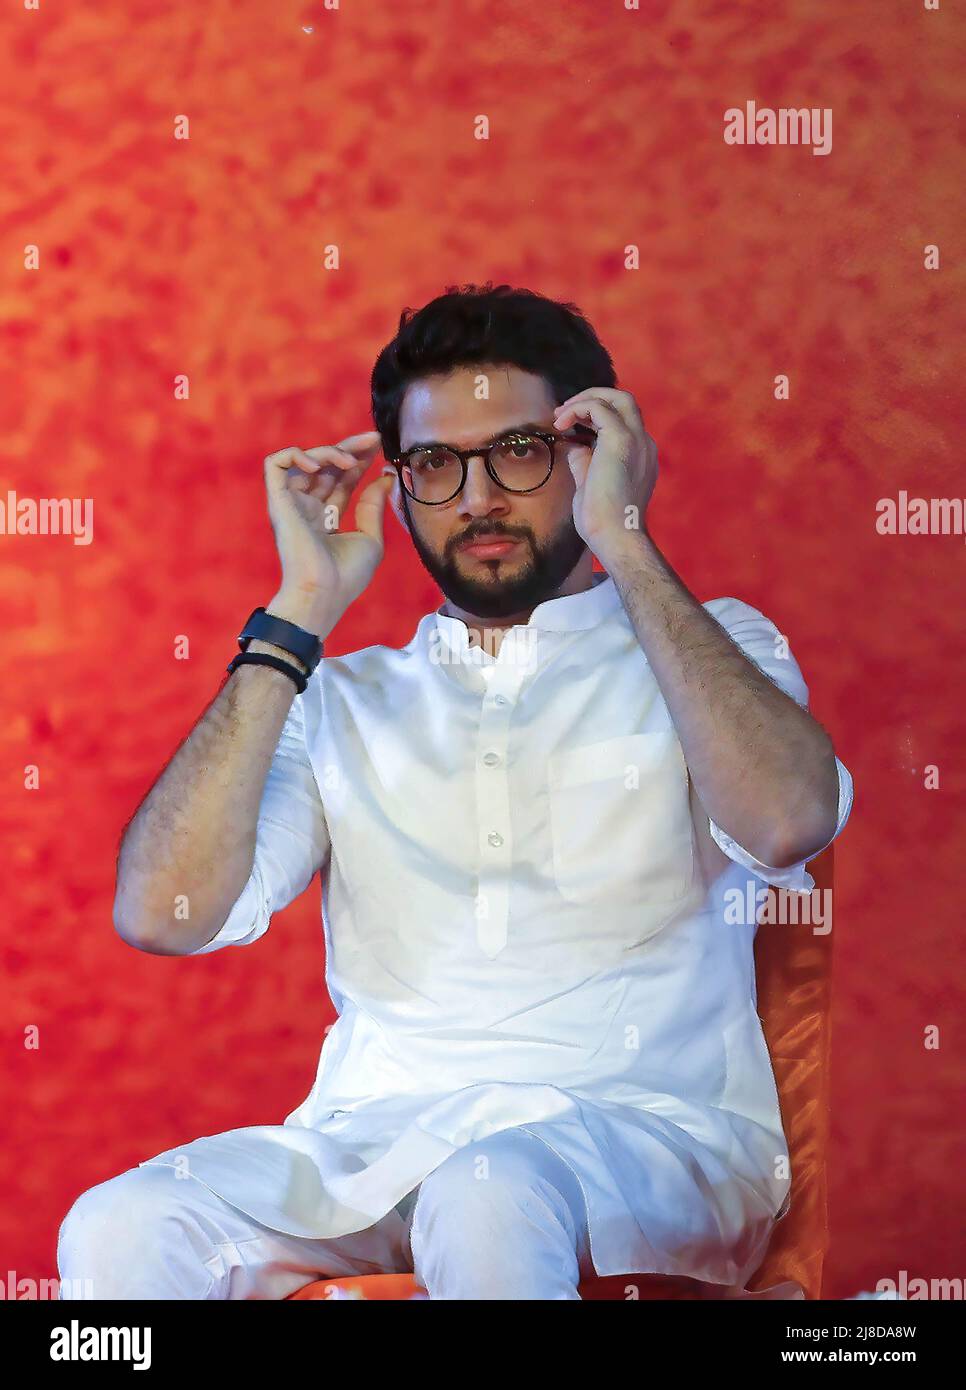 Cabinet Minister of Tourism and Environment (Maharashtra), Aditya Thackeray adjust his spectacles during the Shiv Sena rally. The rally marked the beginning of the party's second phase of 'Shiv Sampark Abhiyan' party's outreach programme with the voters and karyakartas (workers). (Photo by Ashish Vaishnav / SOPA Images/Sipa USA) Stock Photo